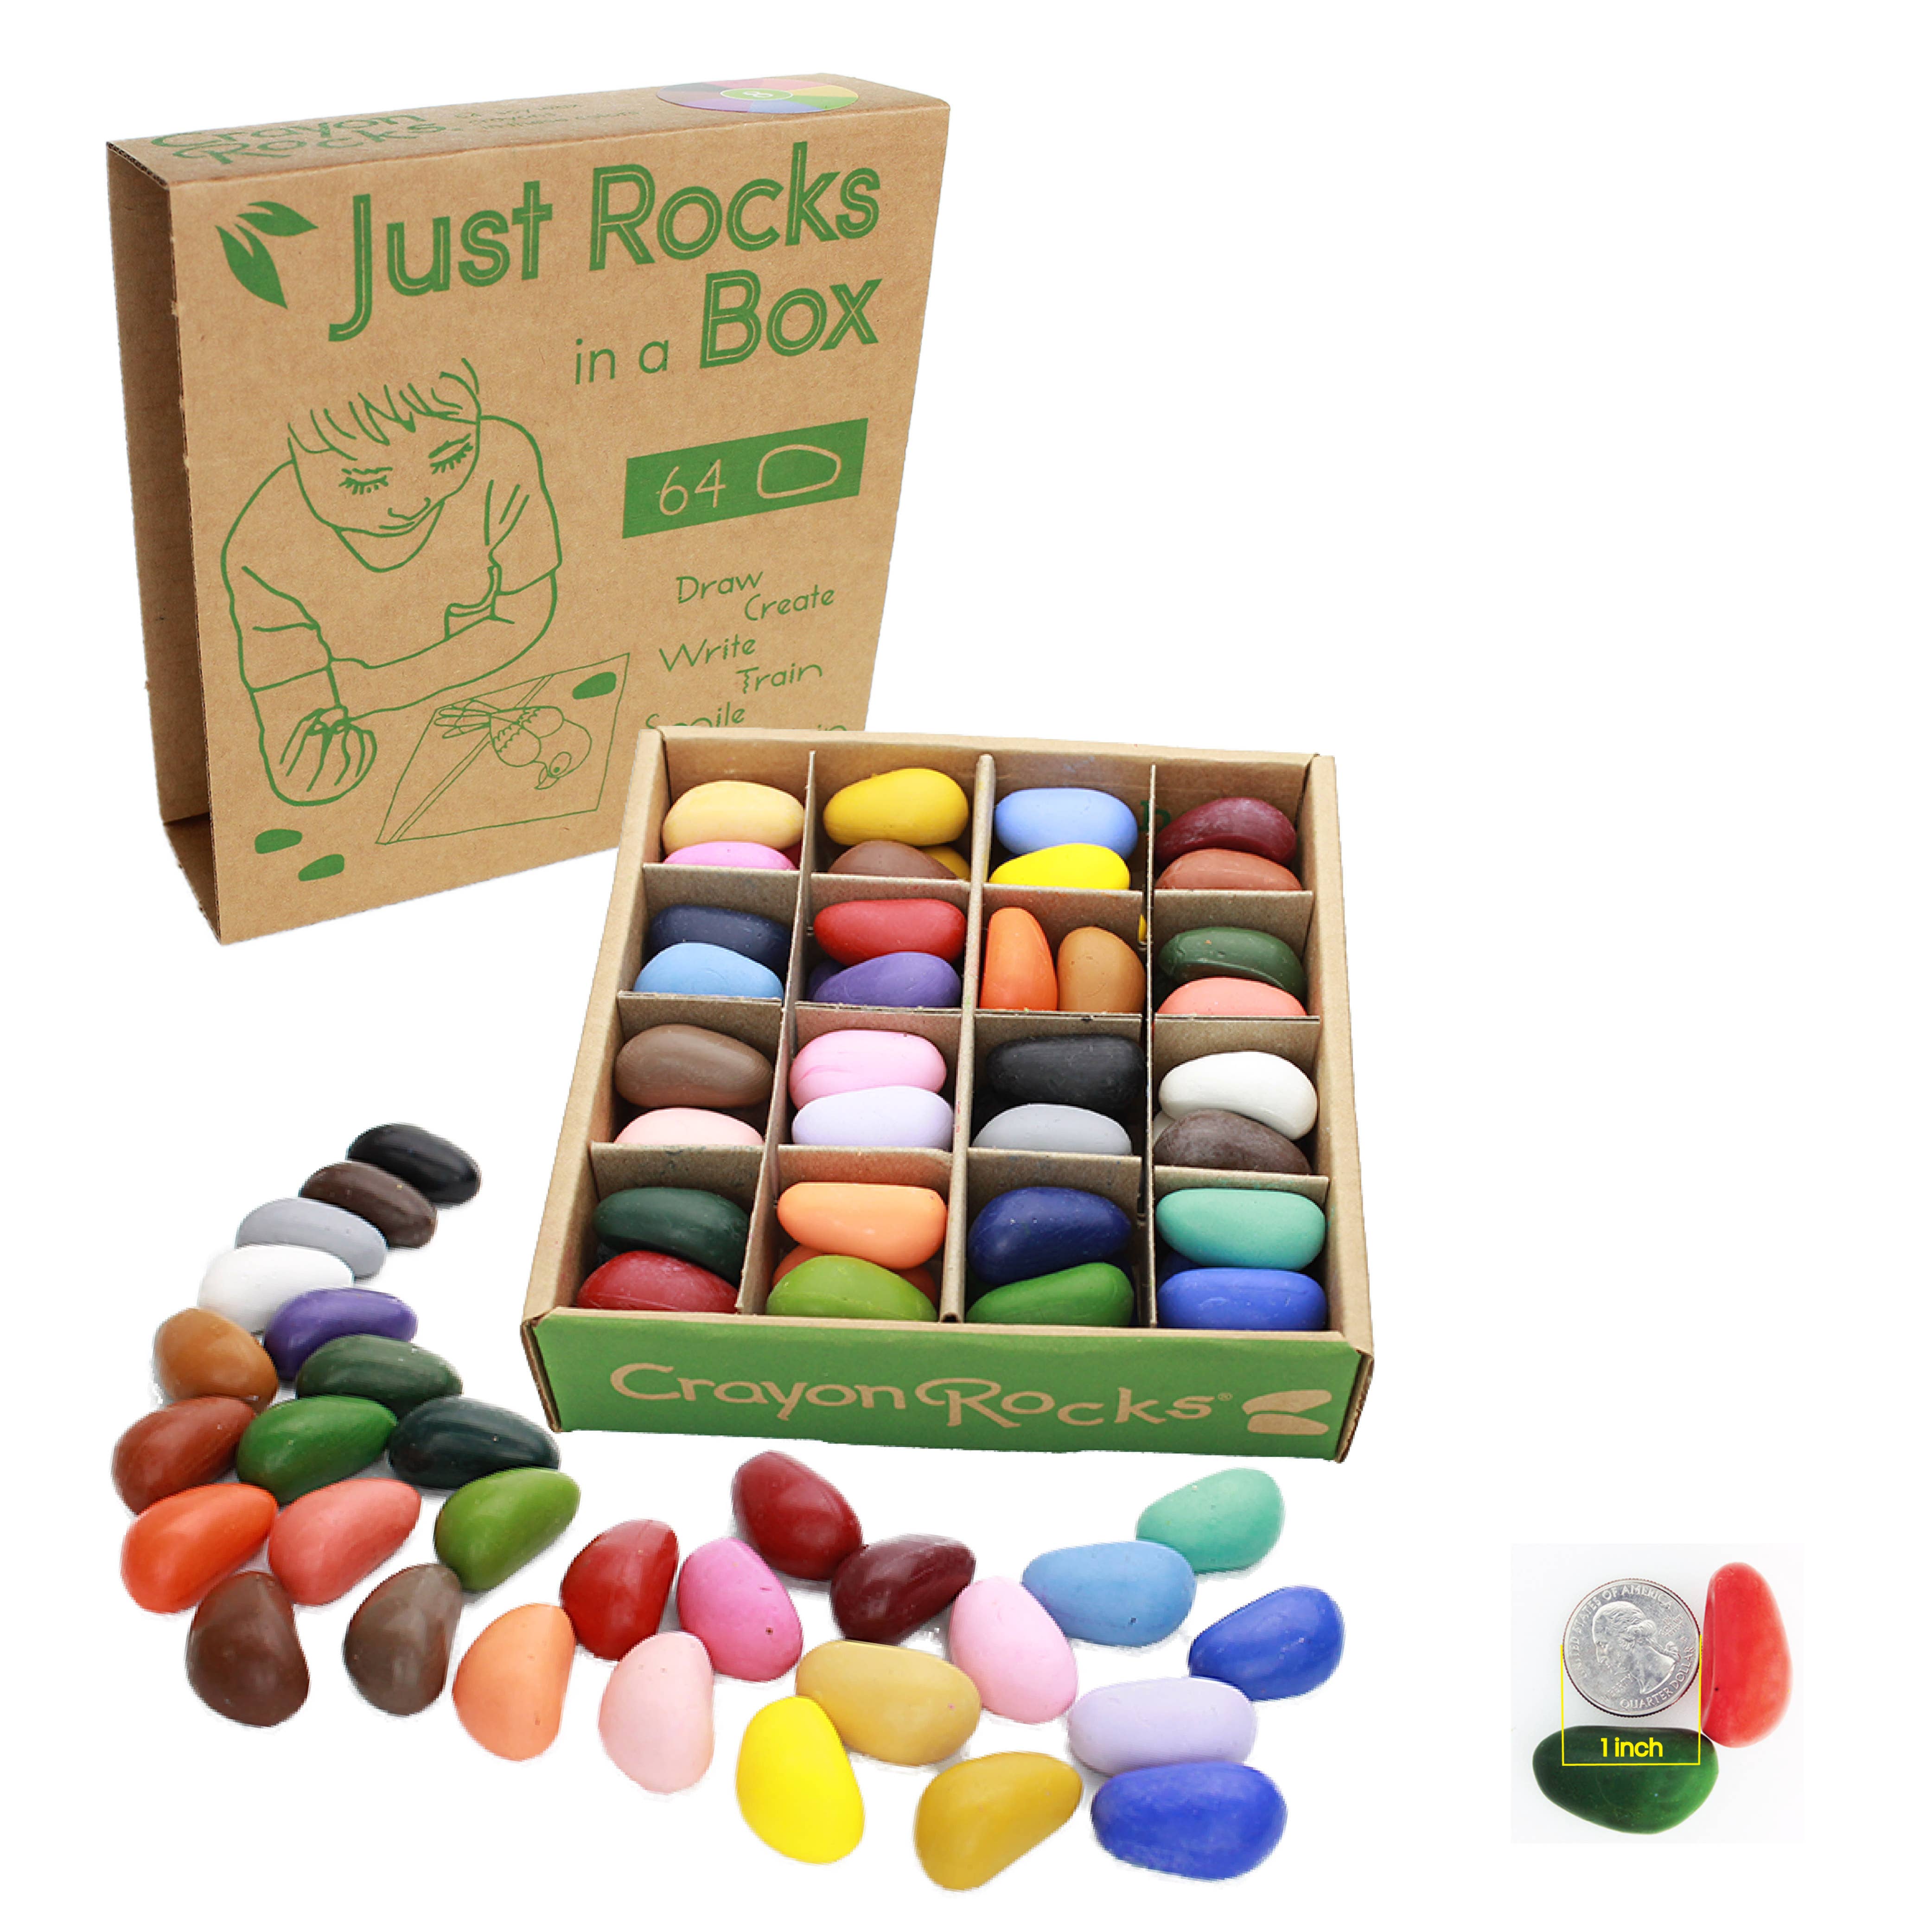 Just Rocks in a Box 32 Pairs Colors - Eco Soy Rock Crayons 64 pieces (2 of  each color)